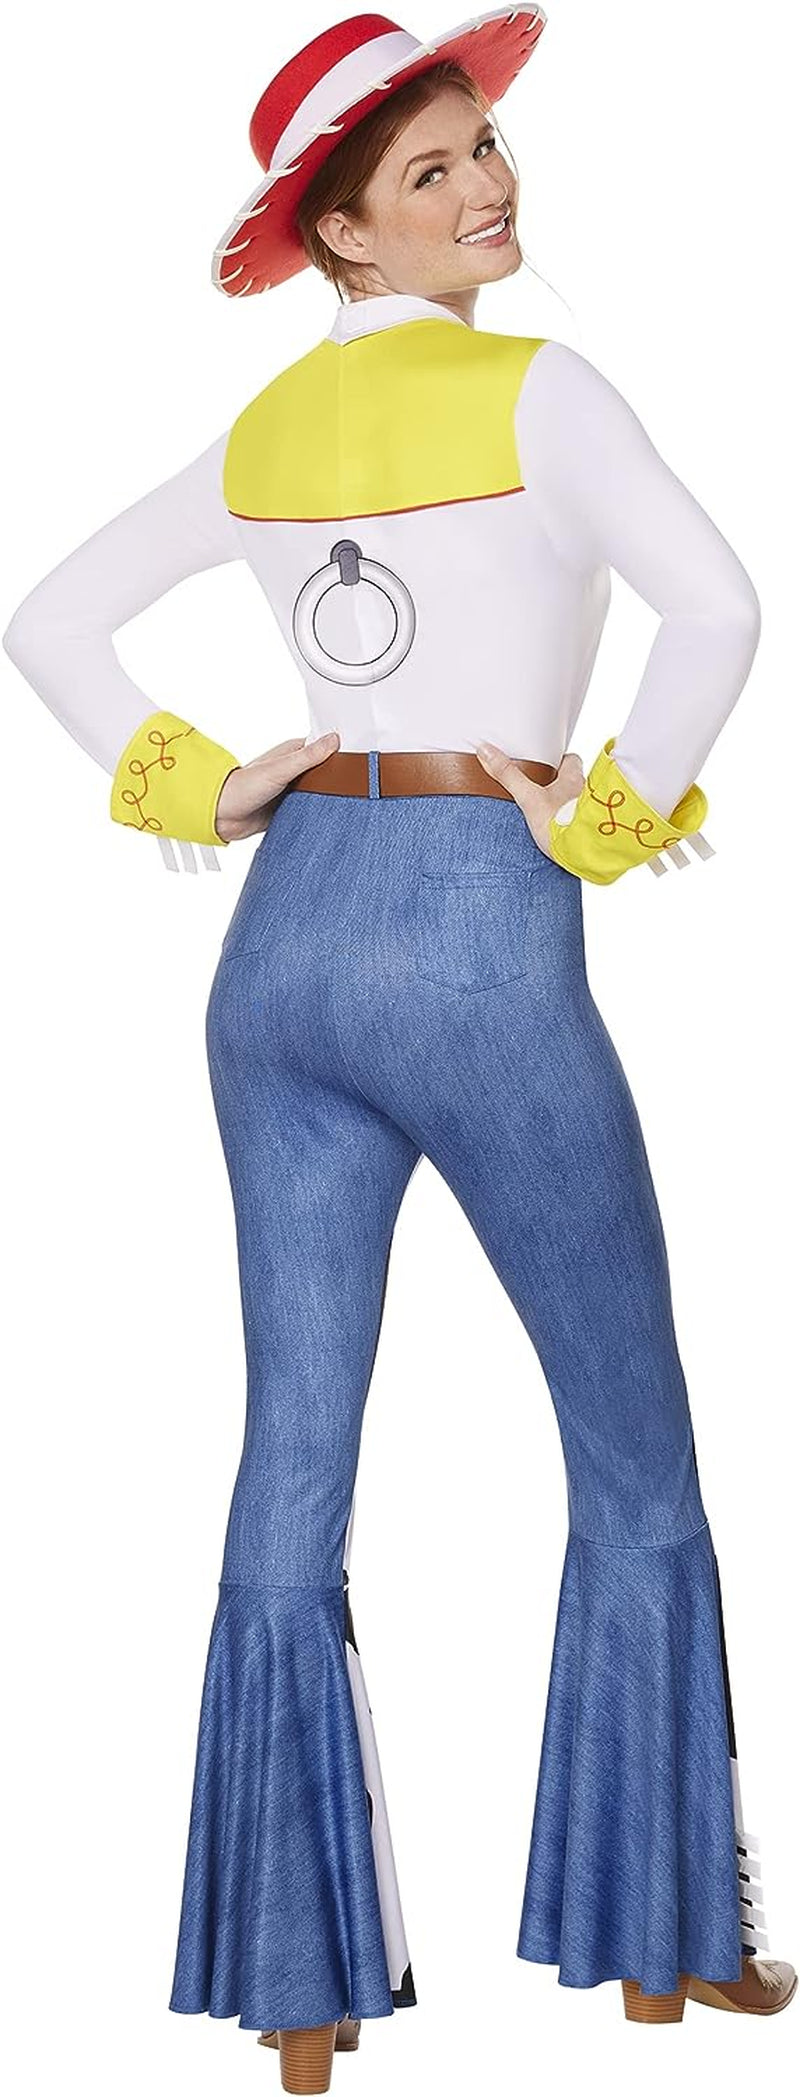 Spirit Halloween Toy Story Adult Jessie Costume | Officially Licensed | Group Costume | Pixar | Cowgirl Cosplay